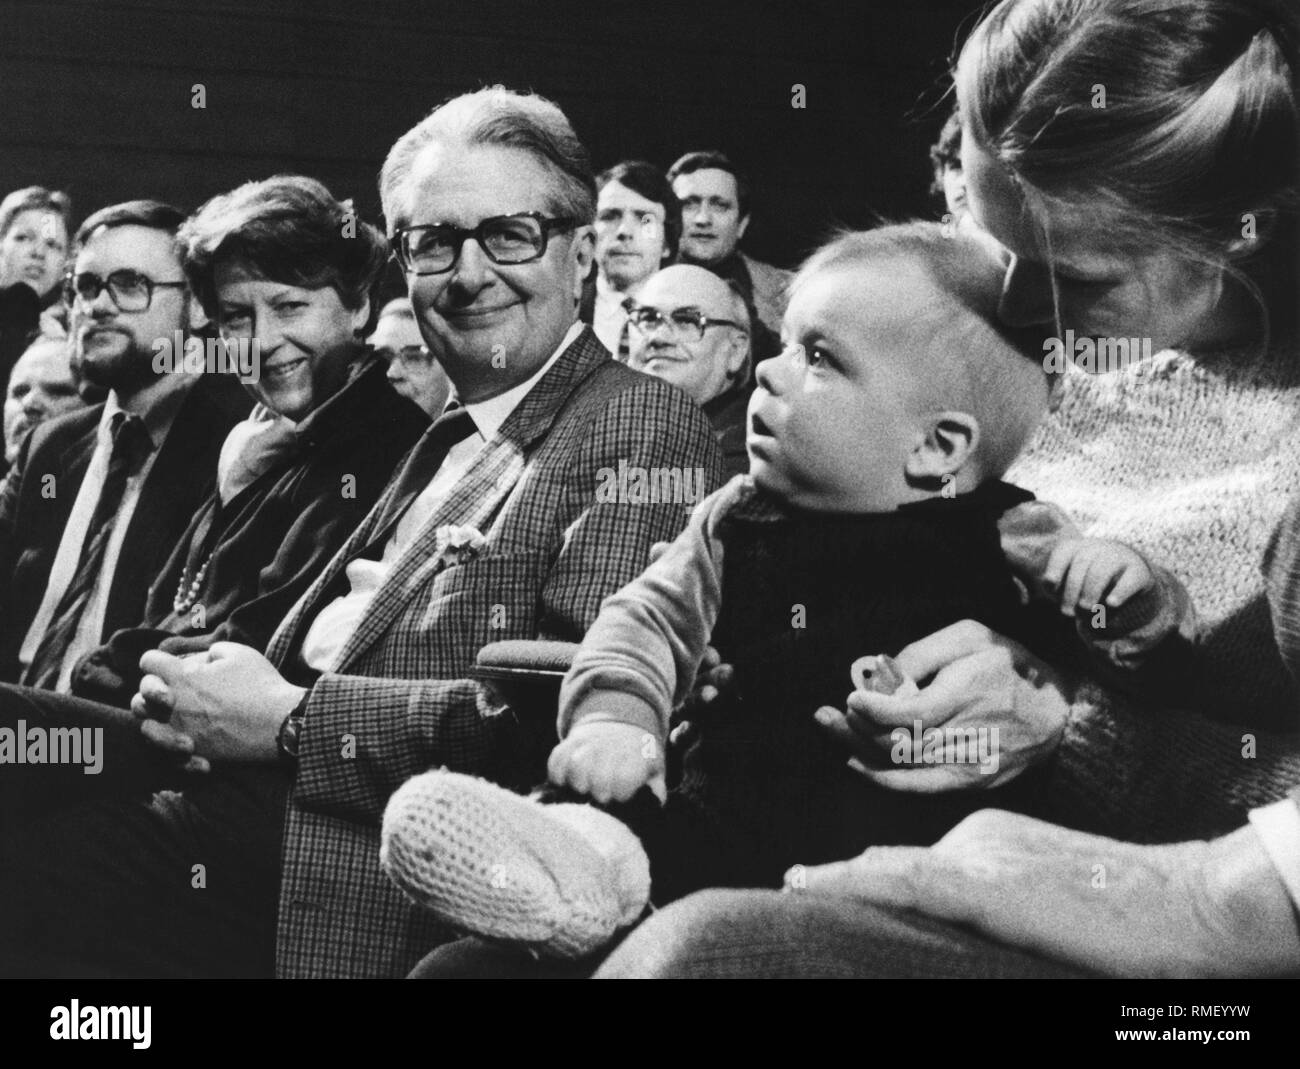 Hans-Jochen Vogel with his wife Liselotte (left) at an event in Saarbruecken. In the foreground, a young mother with her toddler. Stock Photo